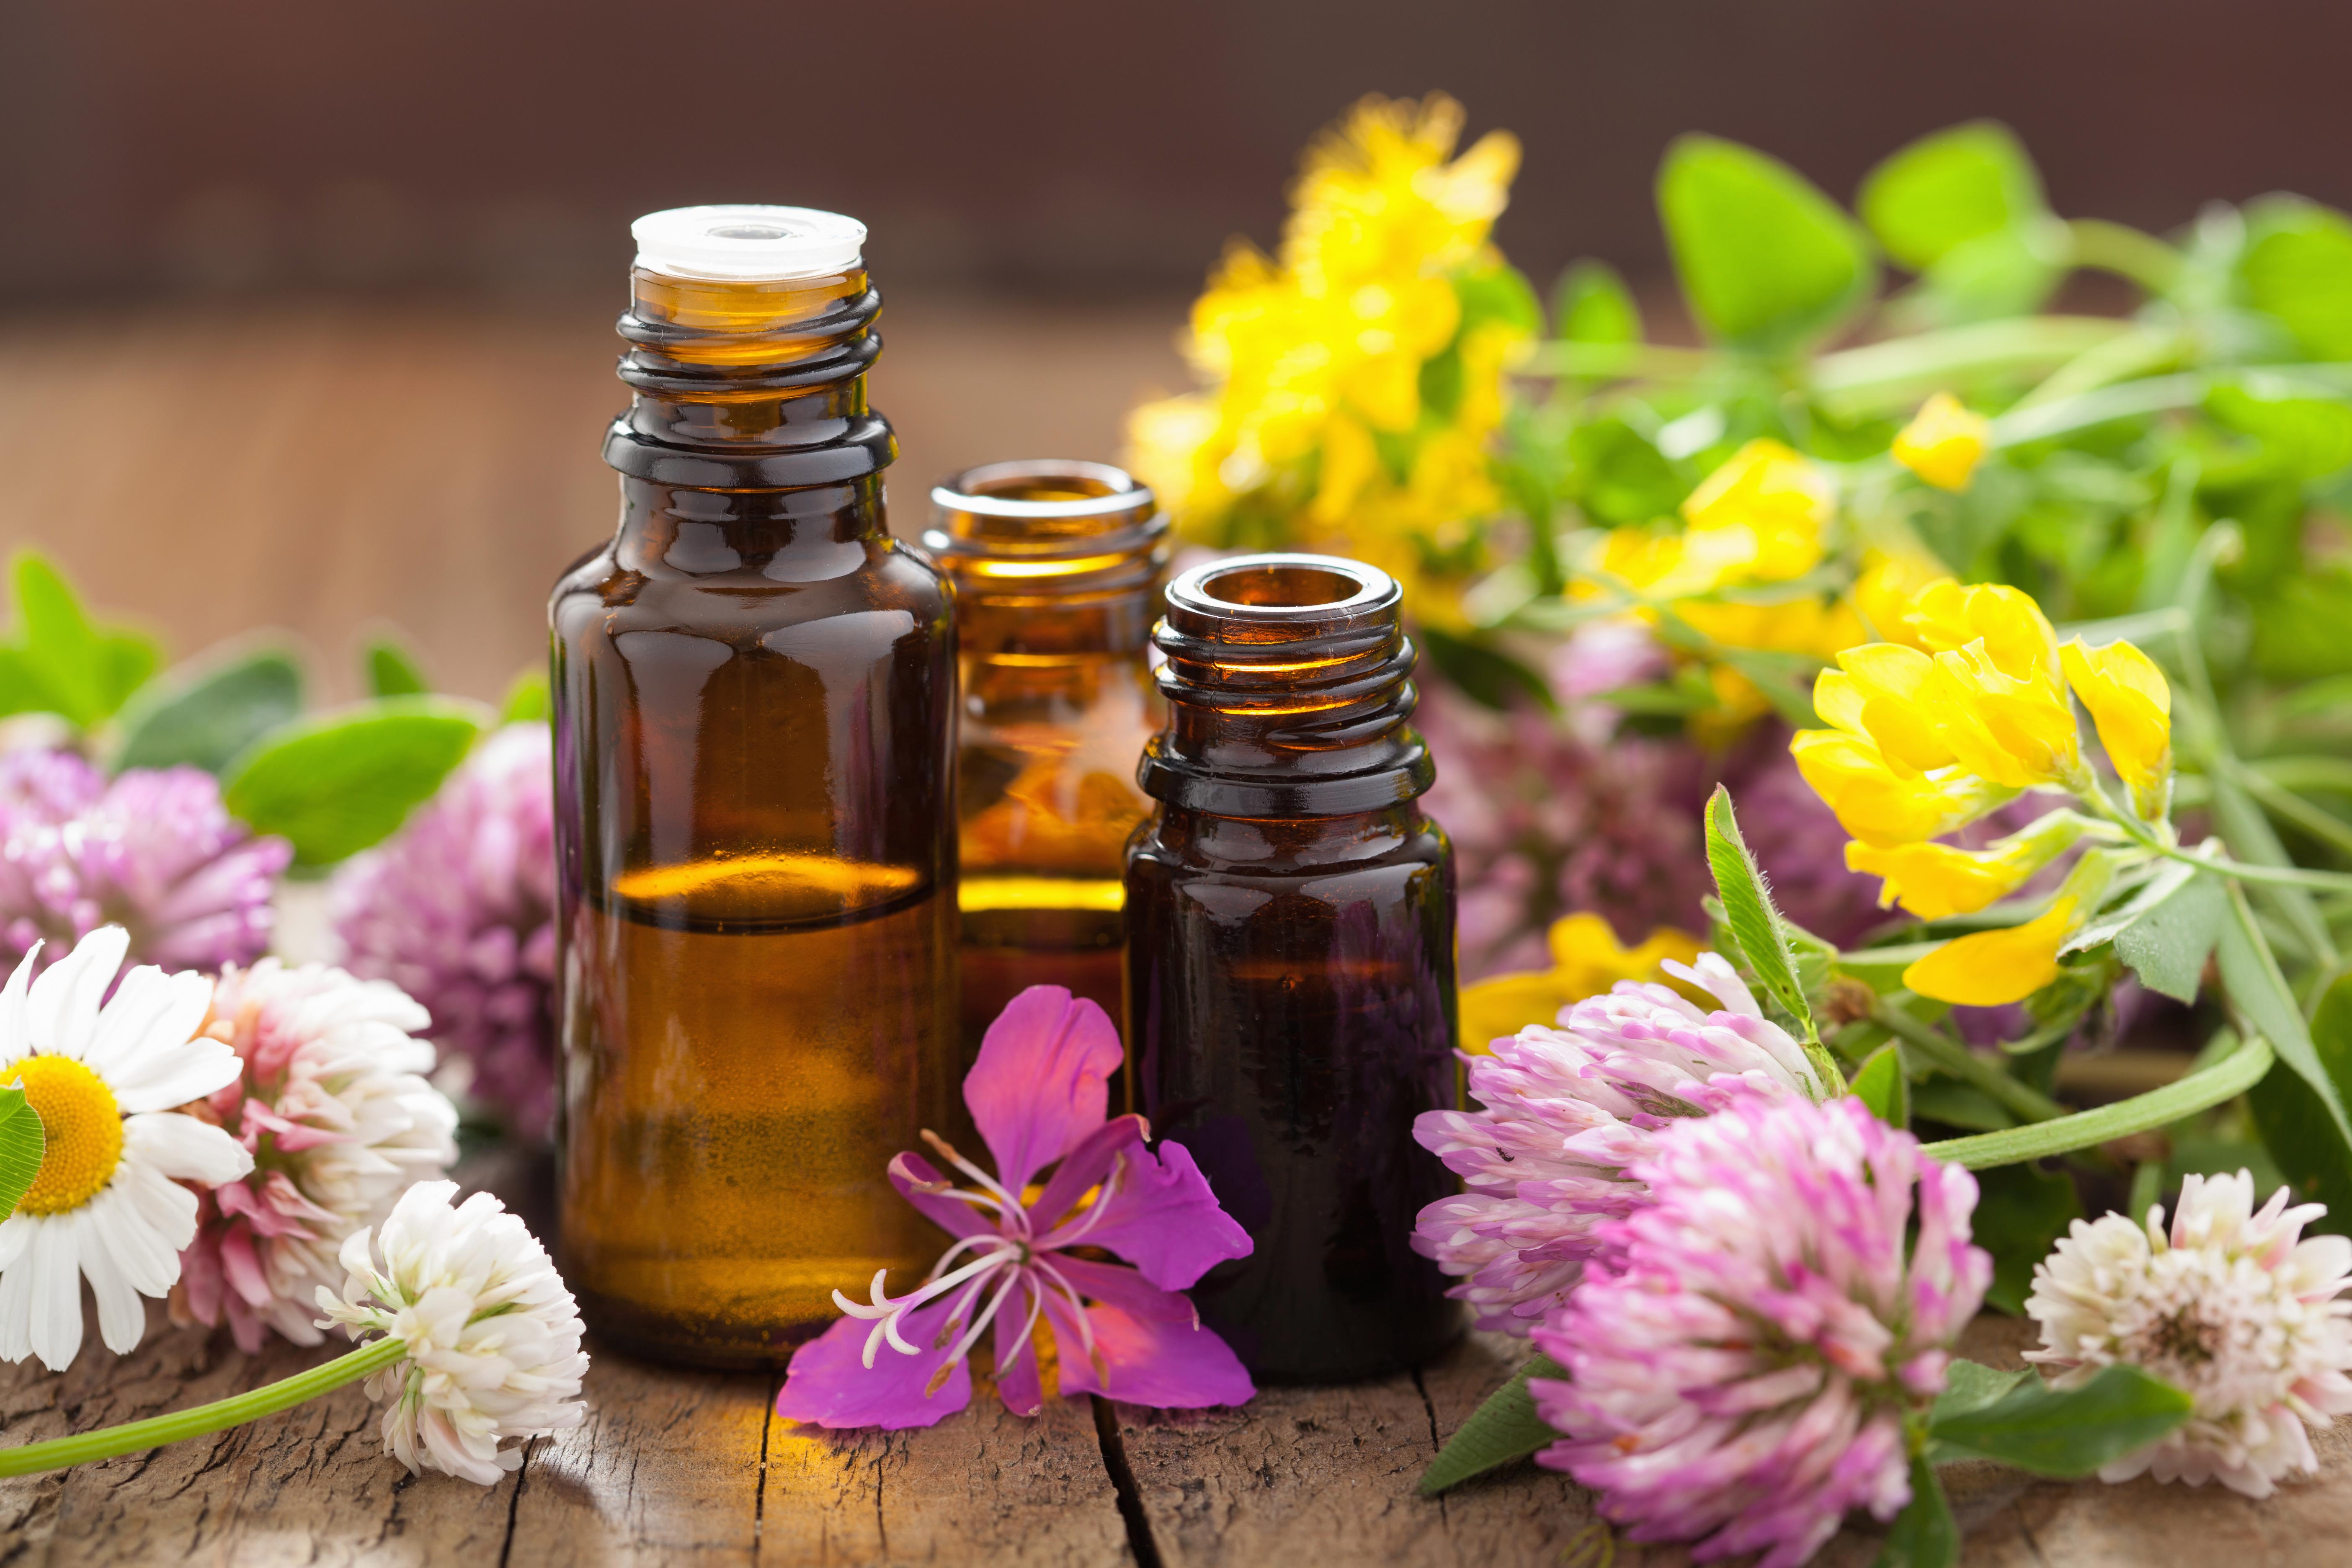 Getting Started with Essential Oils - Downey